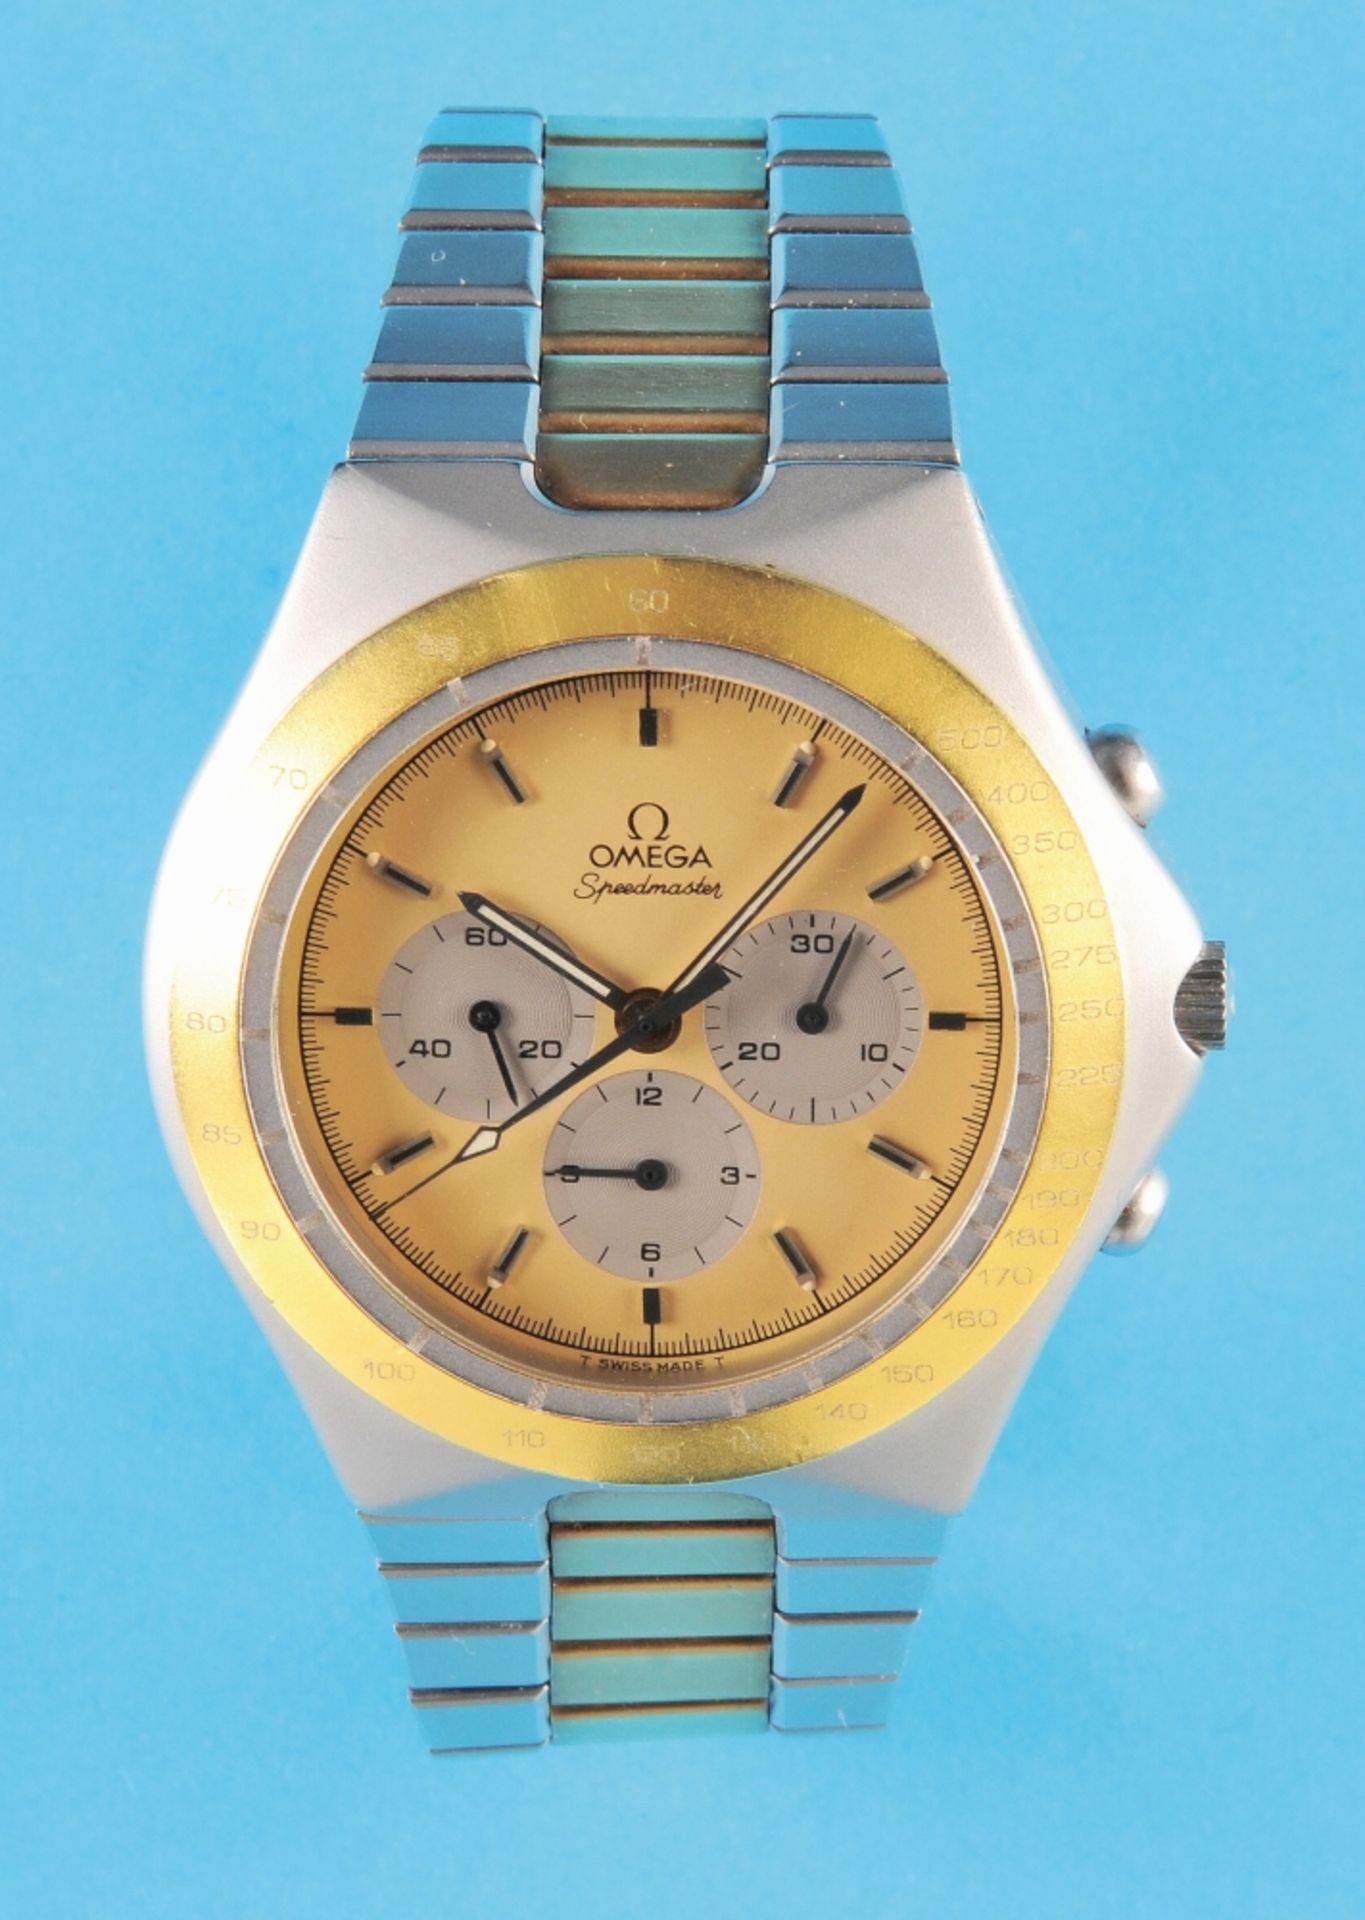 Omega 861 Speedmaster Teutonic steel/gold wristwatch chronograph with steel/gold bracelet with fold